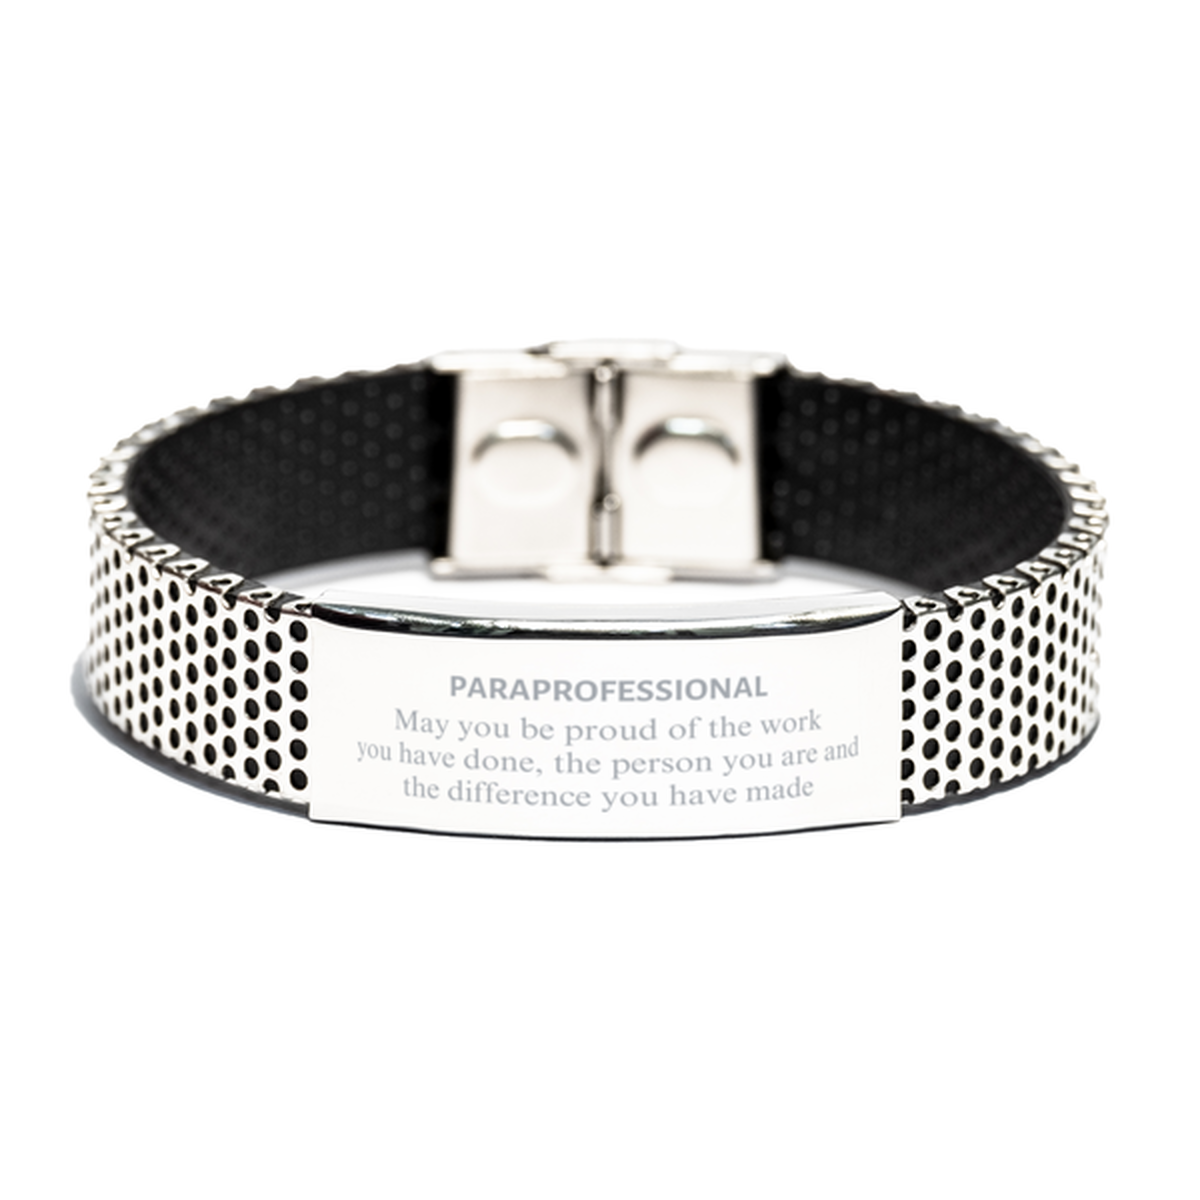 Paraprofessional May you be proud of the work you have done, Retirement Paraprofessional Stainless Steel Bracelet for Colleague Appreciation Gifts Amazing for Paraprofessional